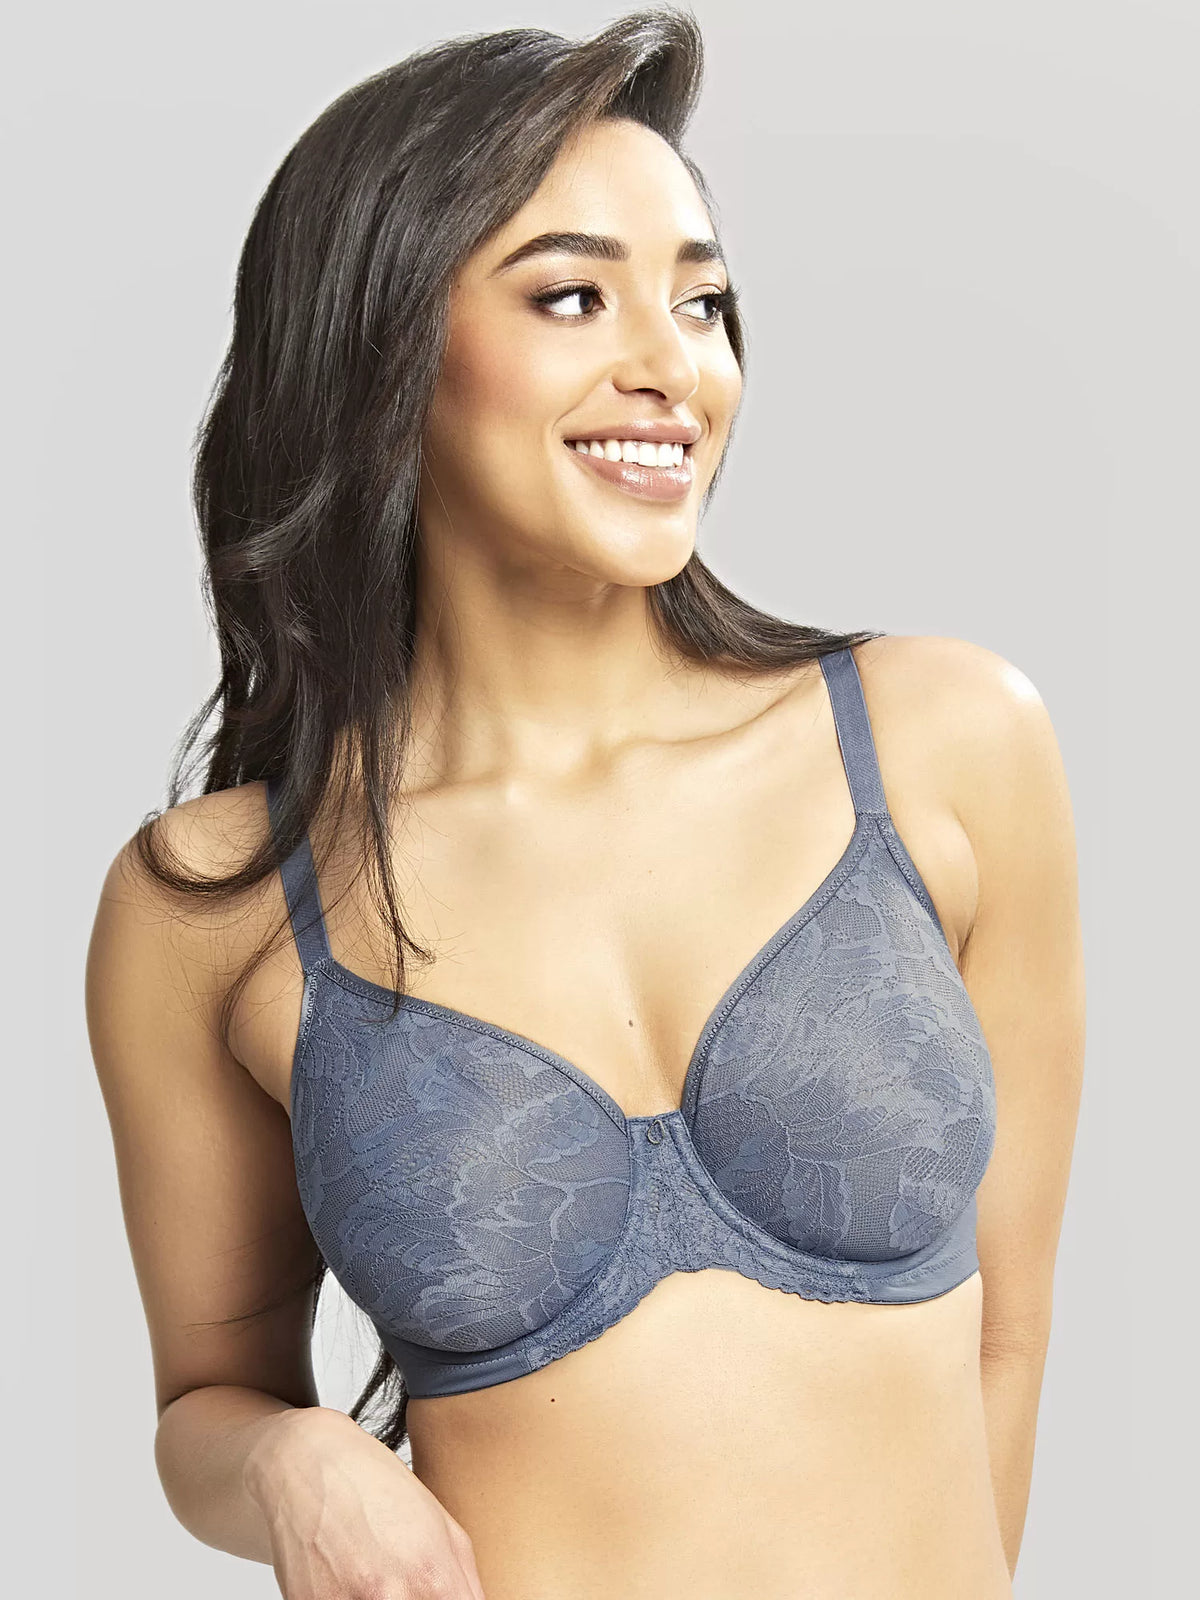 Radiance Full-Cup Molded Underwire bra from Panache at Belle Lacet Lingerie, Phoenix-Gilbert